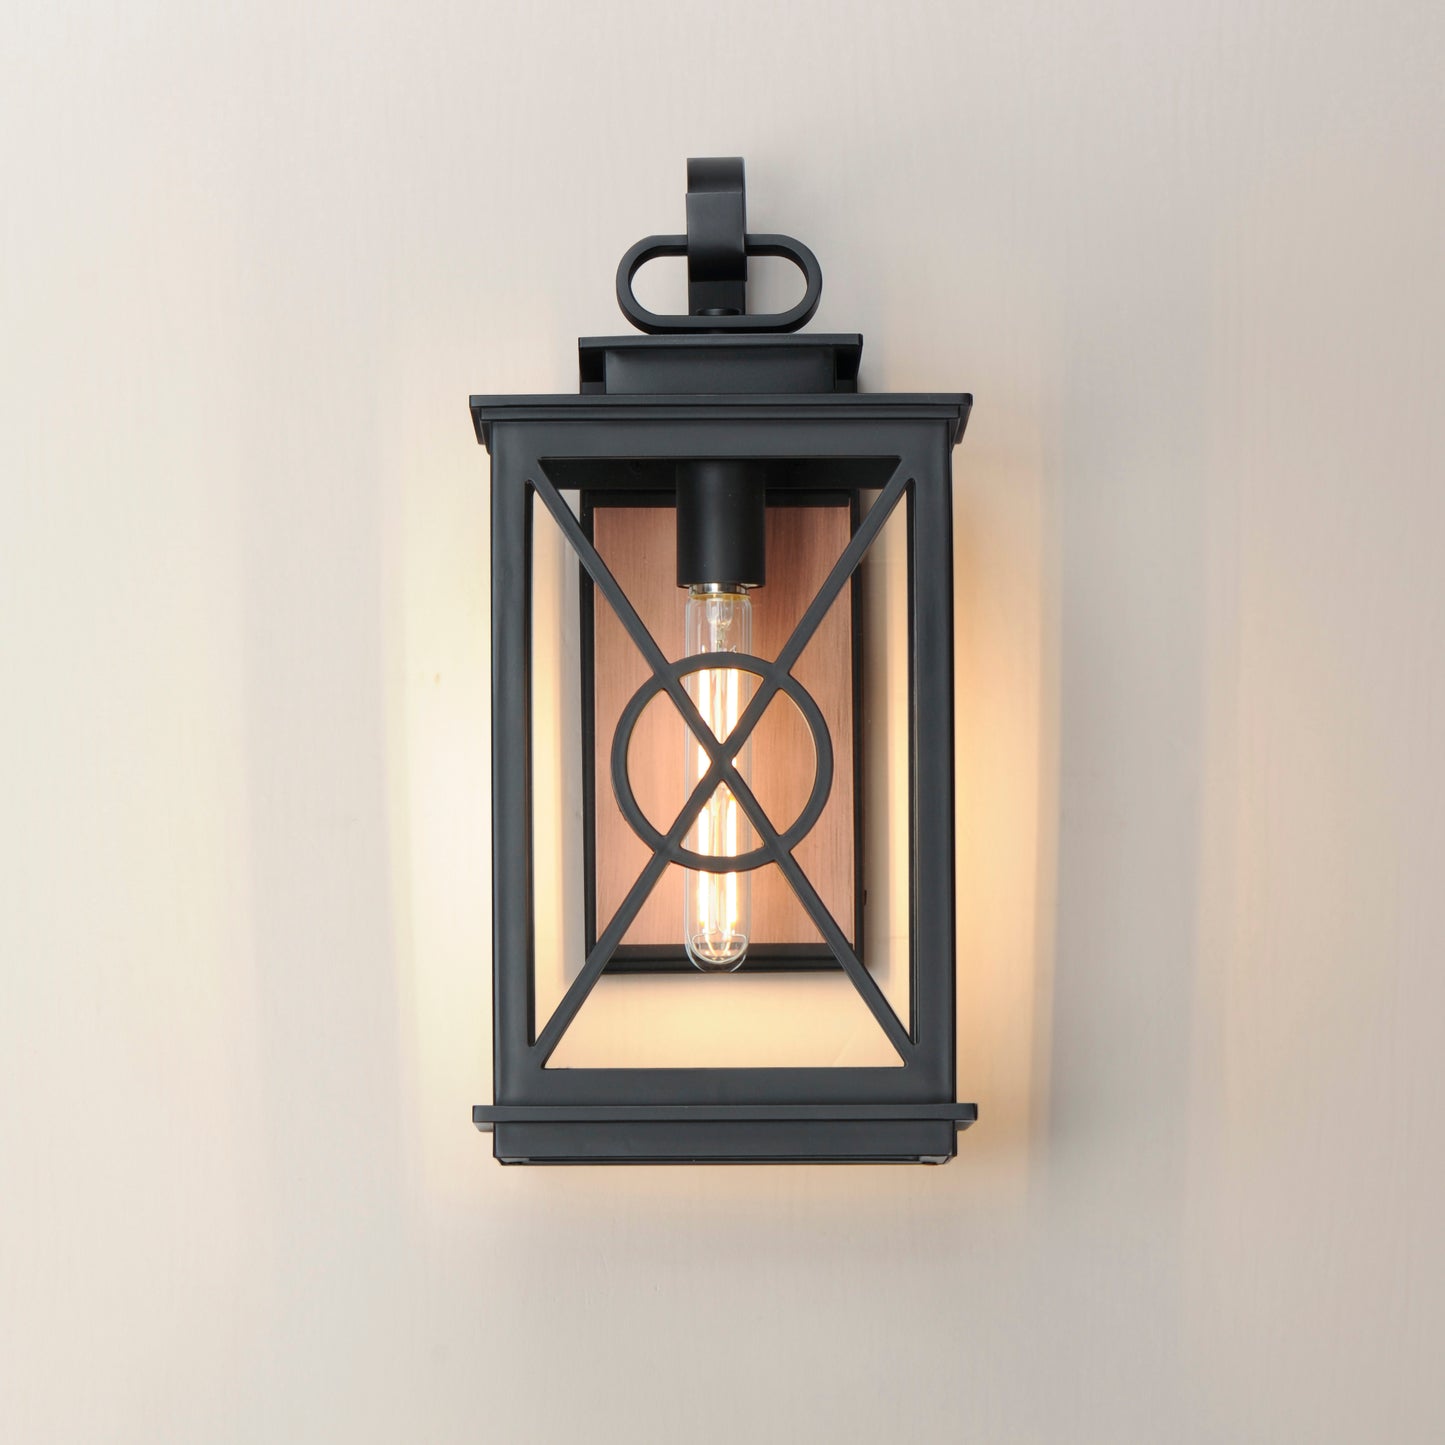 40804CLACPBK - Yorktown VX 18" Outdoor Wall Sconce - Black/Aged Copper